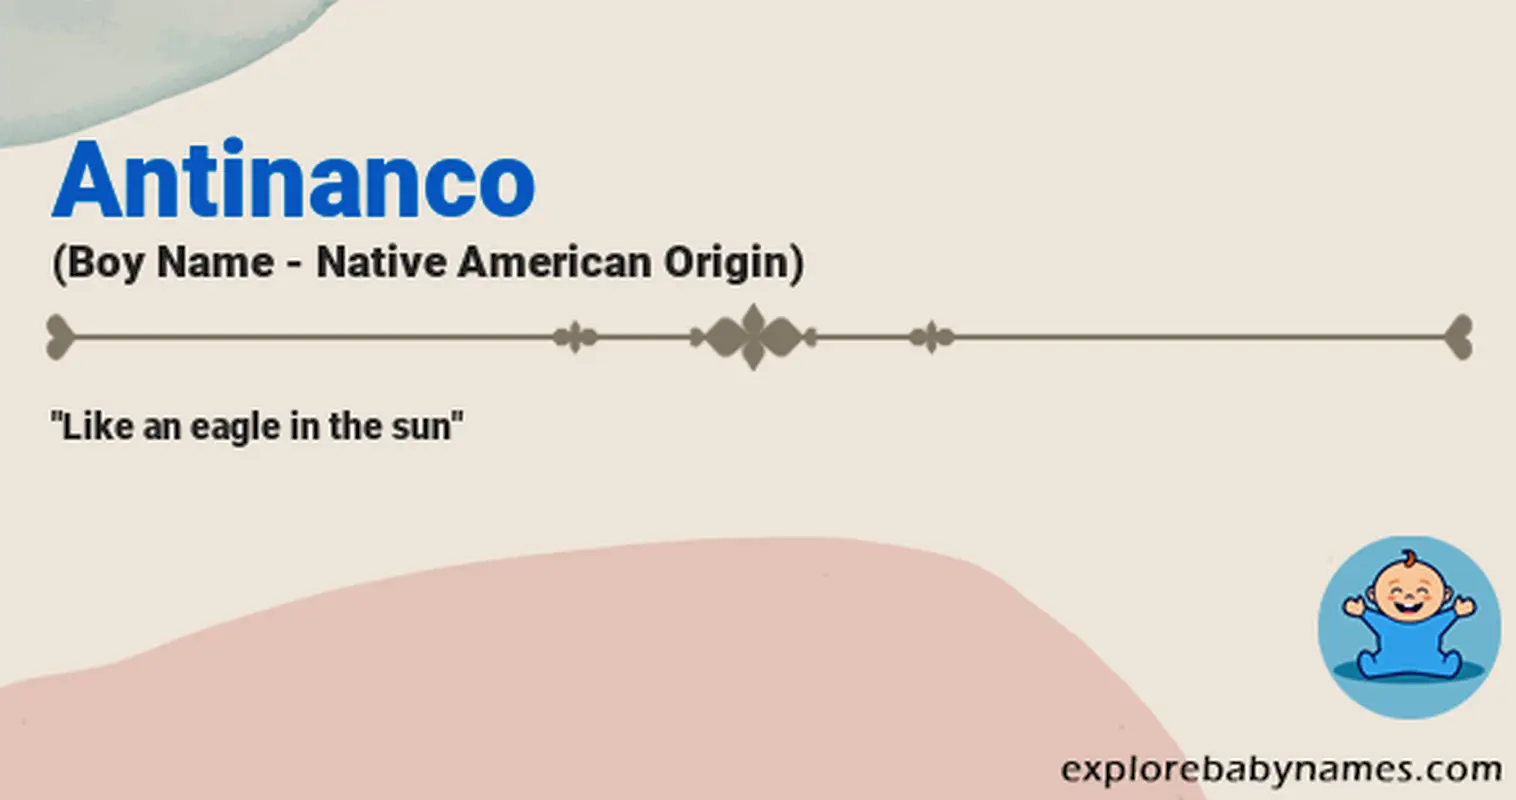 Meaning of Antinanco